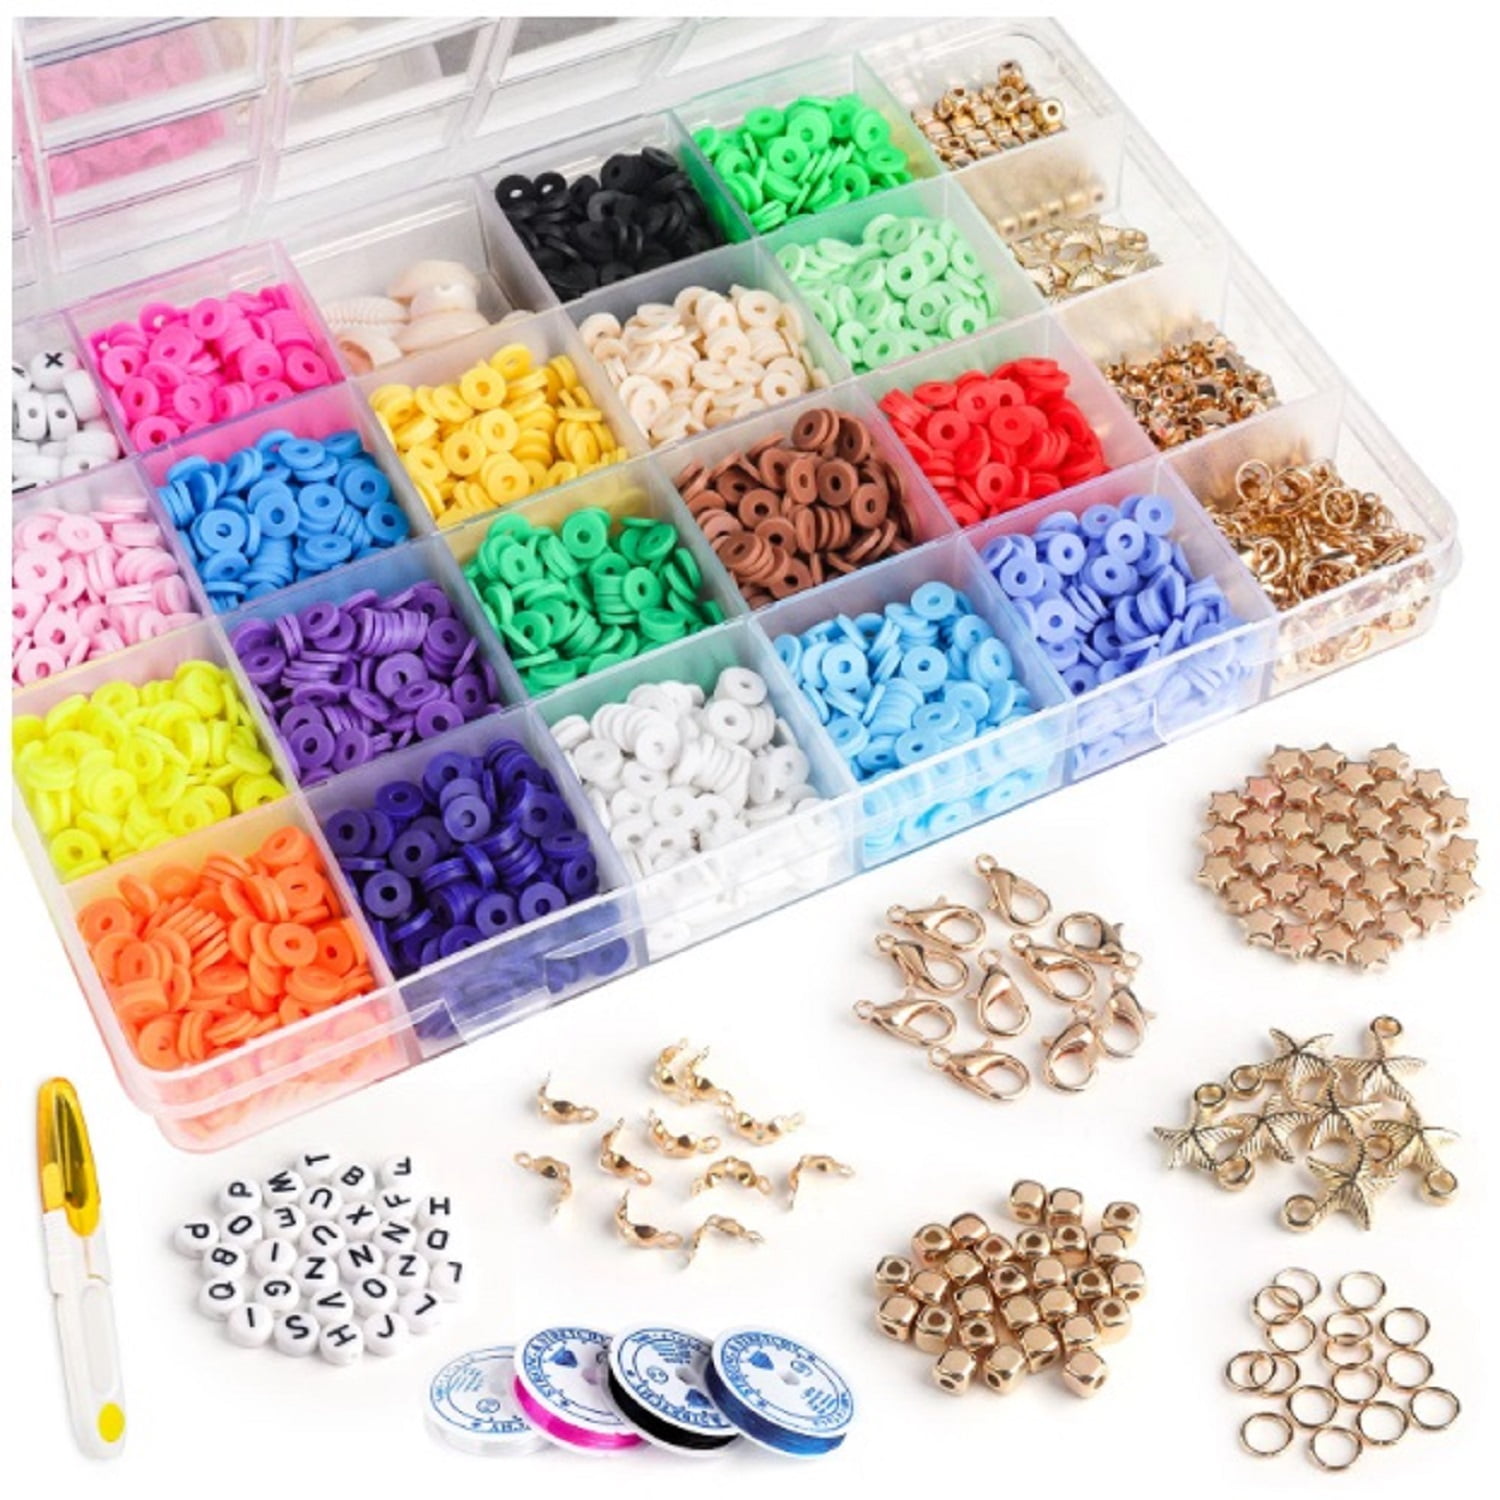  Modda Charm Bracelet Making Kit with Cute Bag, Assorted Beads,  Charms, Necklace, Jewelry Making Kit for Girls, Crafts for Kids, Girls,  Gift for Girls Age 8-12, DIY Bracelet Making kit for